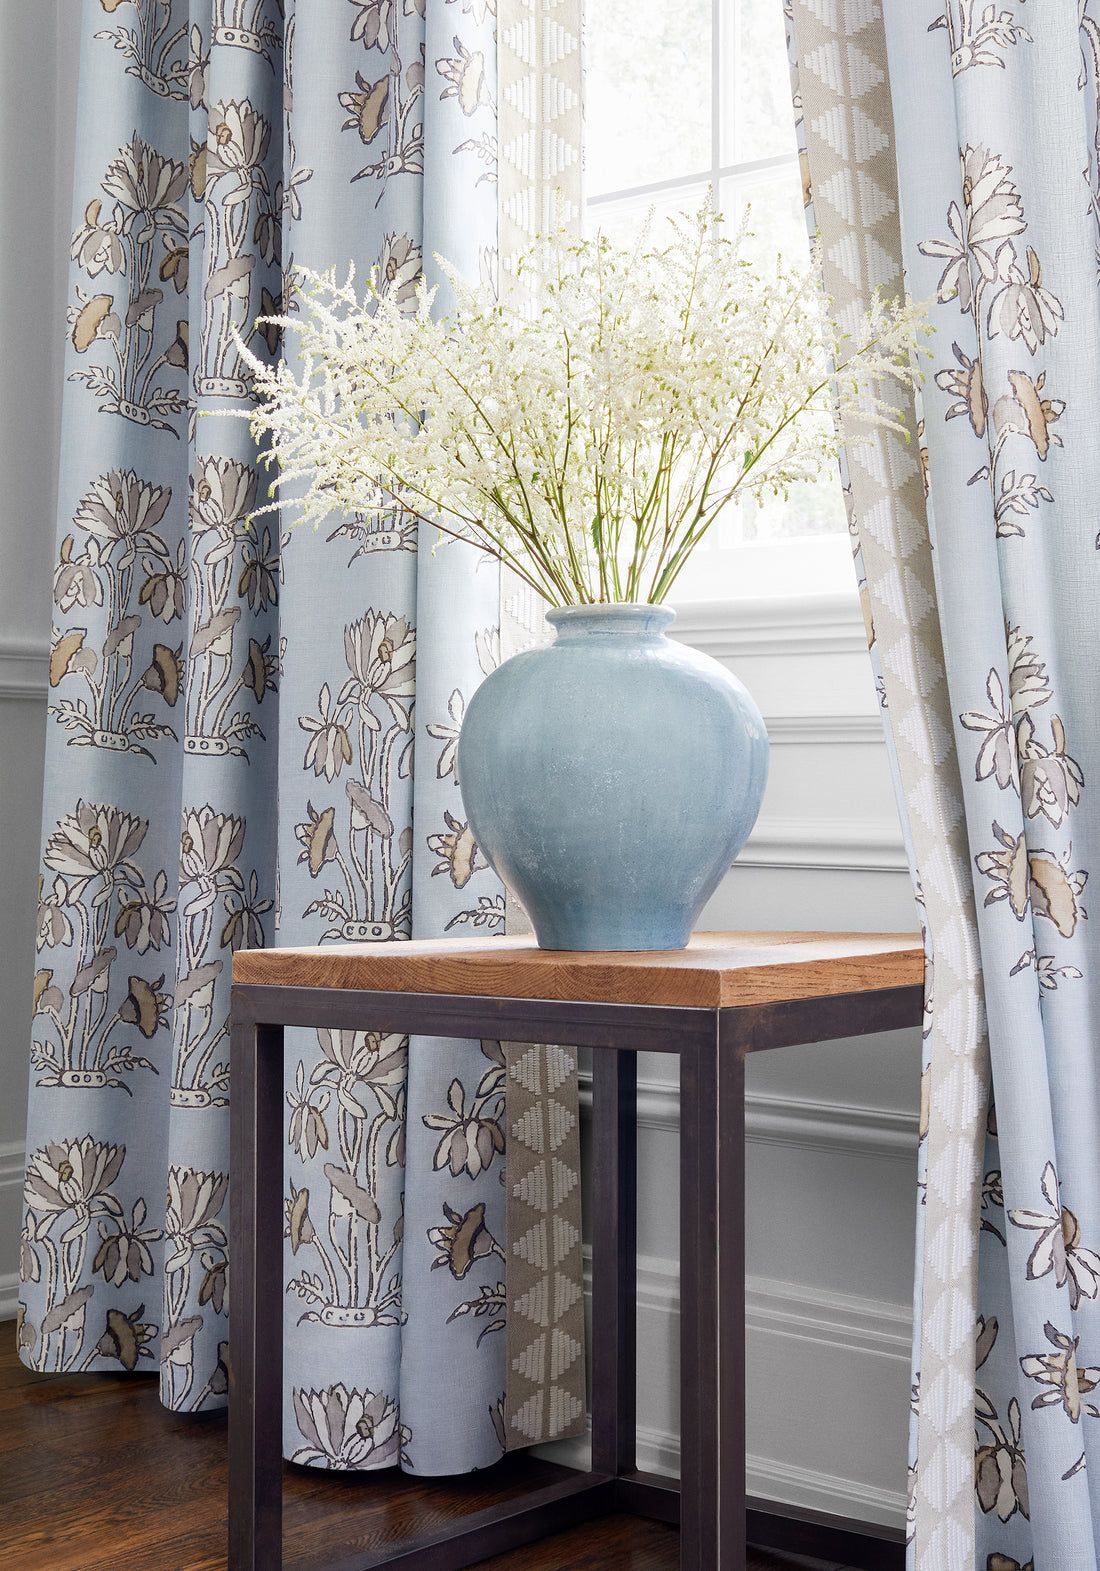 Draperies in Lily Flower printed fabric in spa blue with linen trim - pattern number F913201 - by Thibaut in the Mesa collection